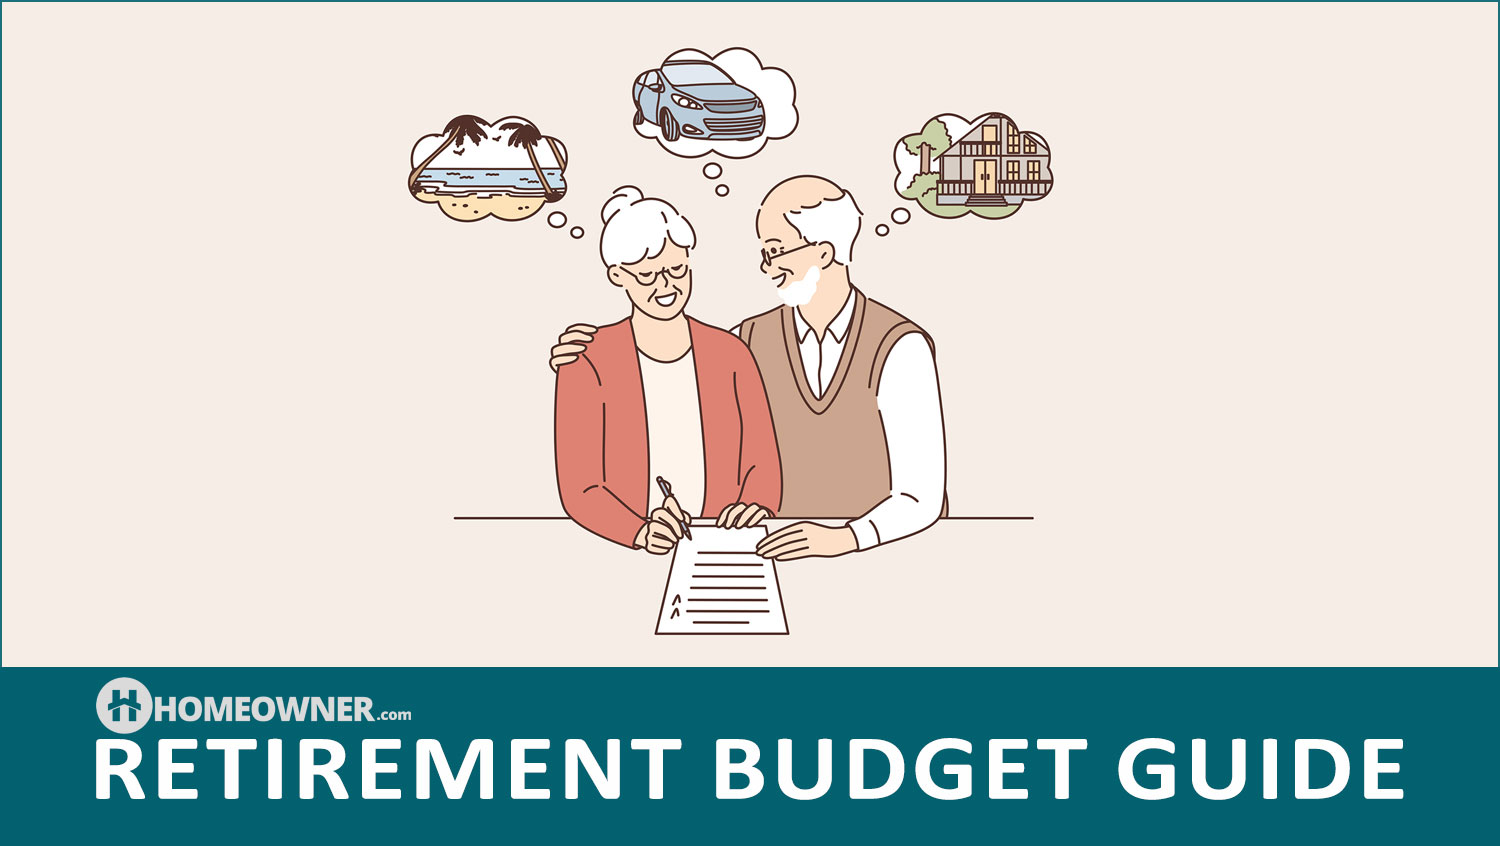 How To Budget for Retirement